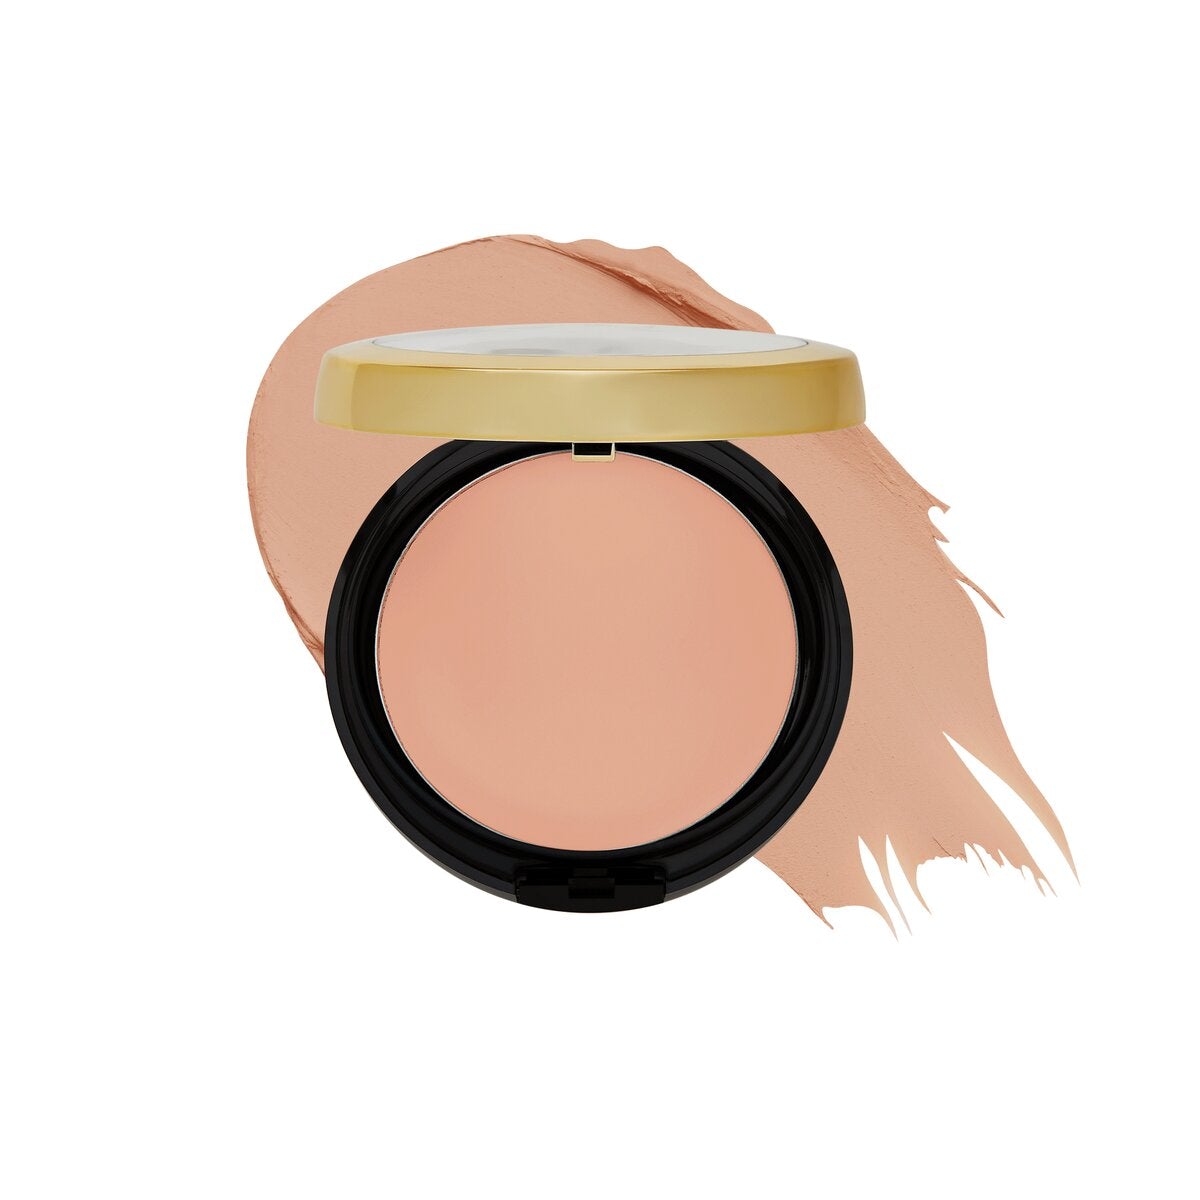 CONCEAL AND PERFECT CREAM TO POWDER FOUNDATION CREAMY NATURAL - MILANI